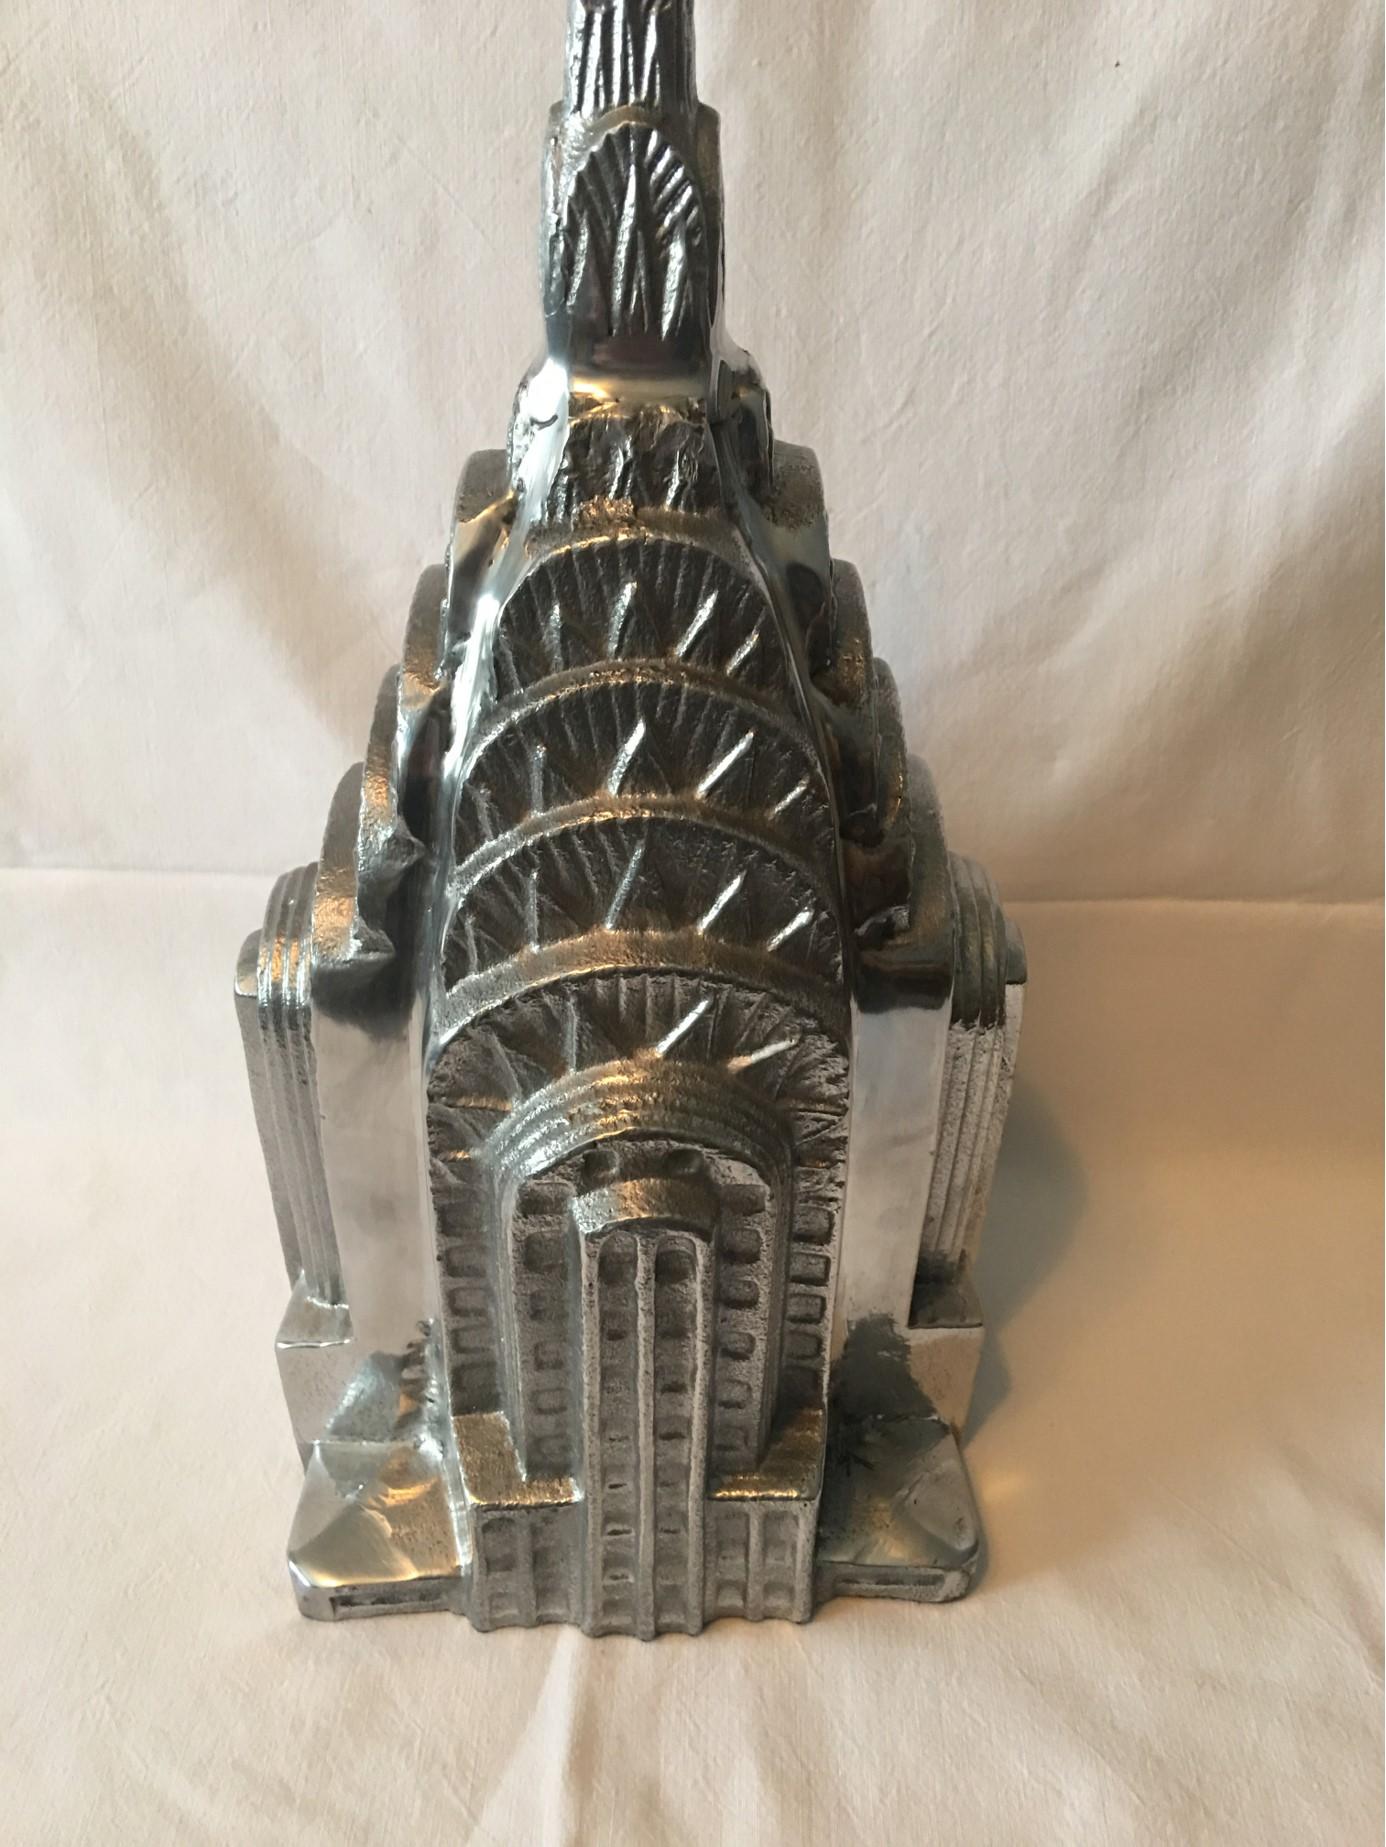  New York Souvenir Chrysler Building Top Made of Aluminum from the 1970s 3